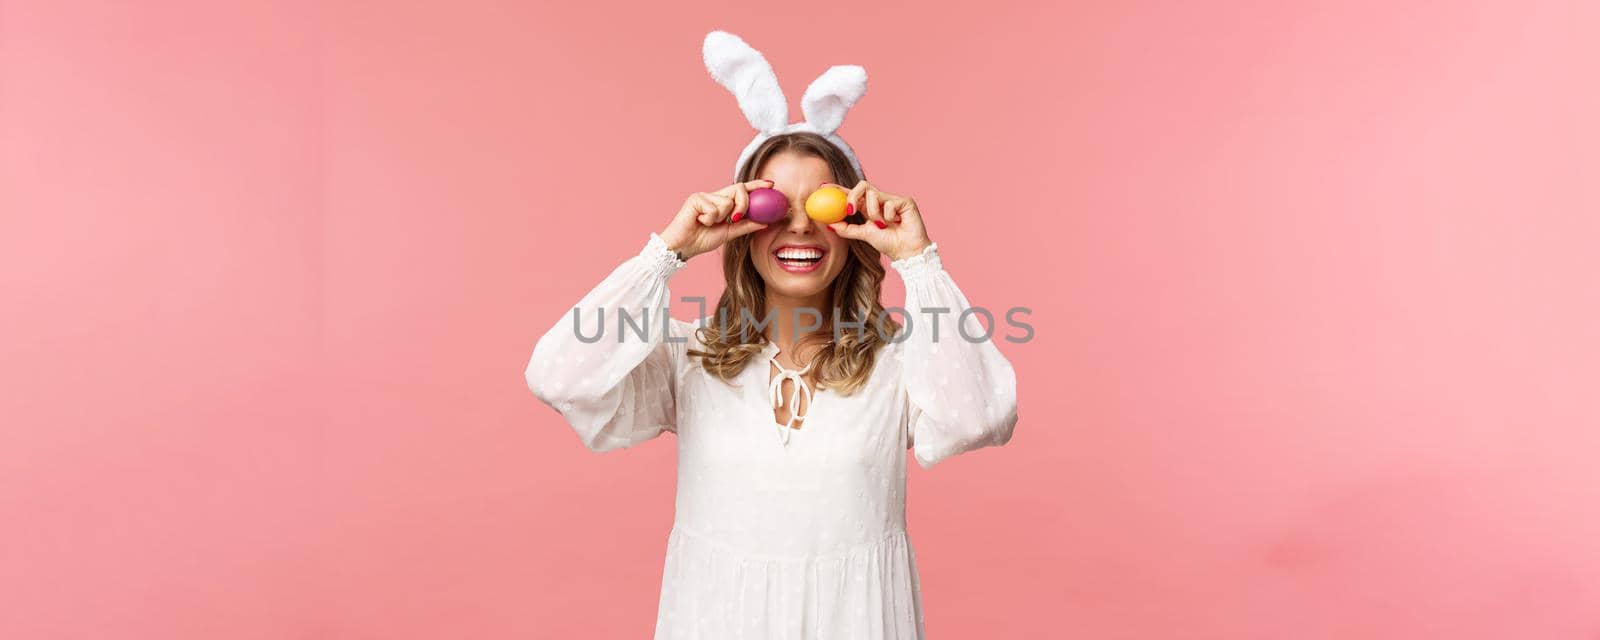 Holidays, spring and party concept. Portrait of lovely, tender smiling woman in rabbit ears and white dress celebrating Easter day, holding painted eggs on eyes and grinning, pink background.